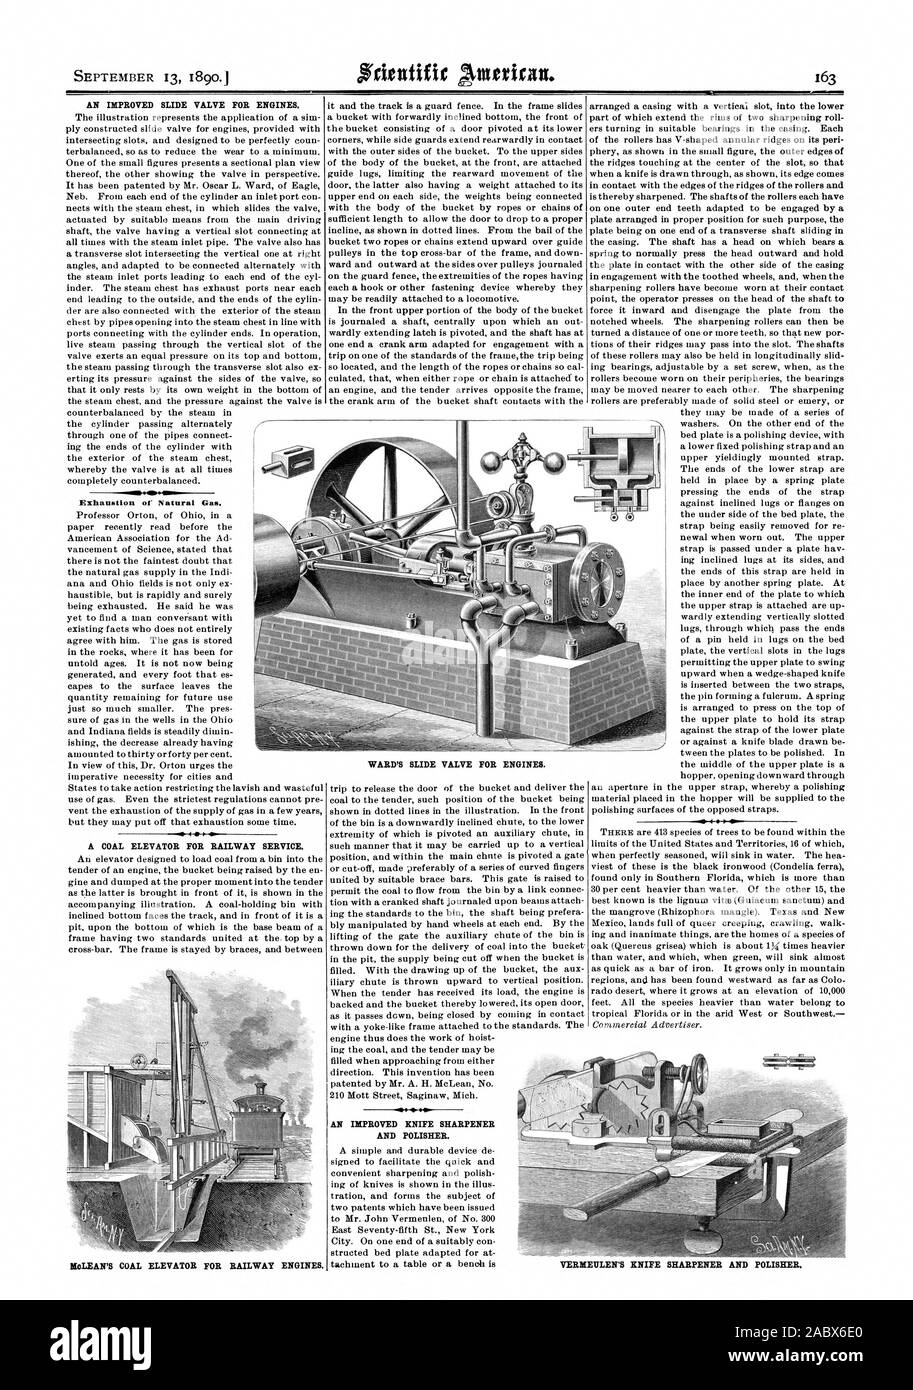 AN IMPROVED SLIDE VALVE FOR ENGINES. Exhaustion of Natural Gas. 4 tiw A COAL ELEVATOR FOR RAILWAY SERVICE. bioLEAN'S COAL ELEVATOR FOR RAILWAY ENGINES. AN IMPROVED KNIFE SHARPENER AND POLISHER. WARD'S SLIDE VALVE FOR ENGINES. VERBIEDLEN'S KNIFE SHARPENER AND POLISHER., scientific american, 90-09-13 Stock Photo